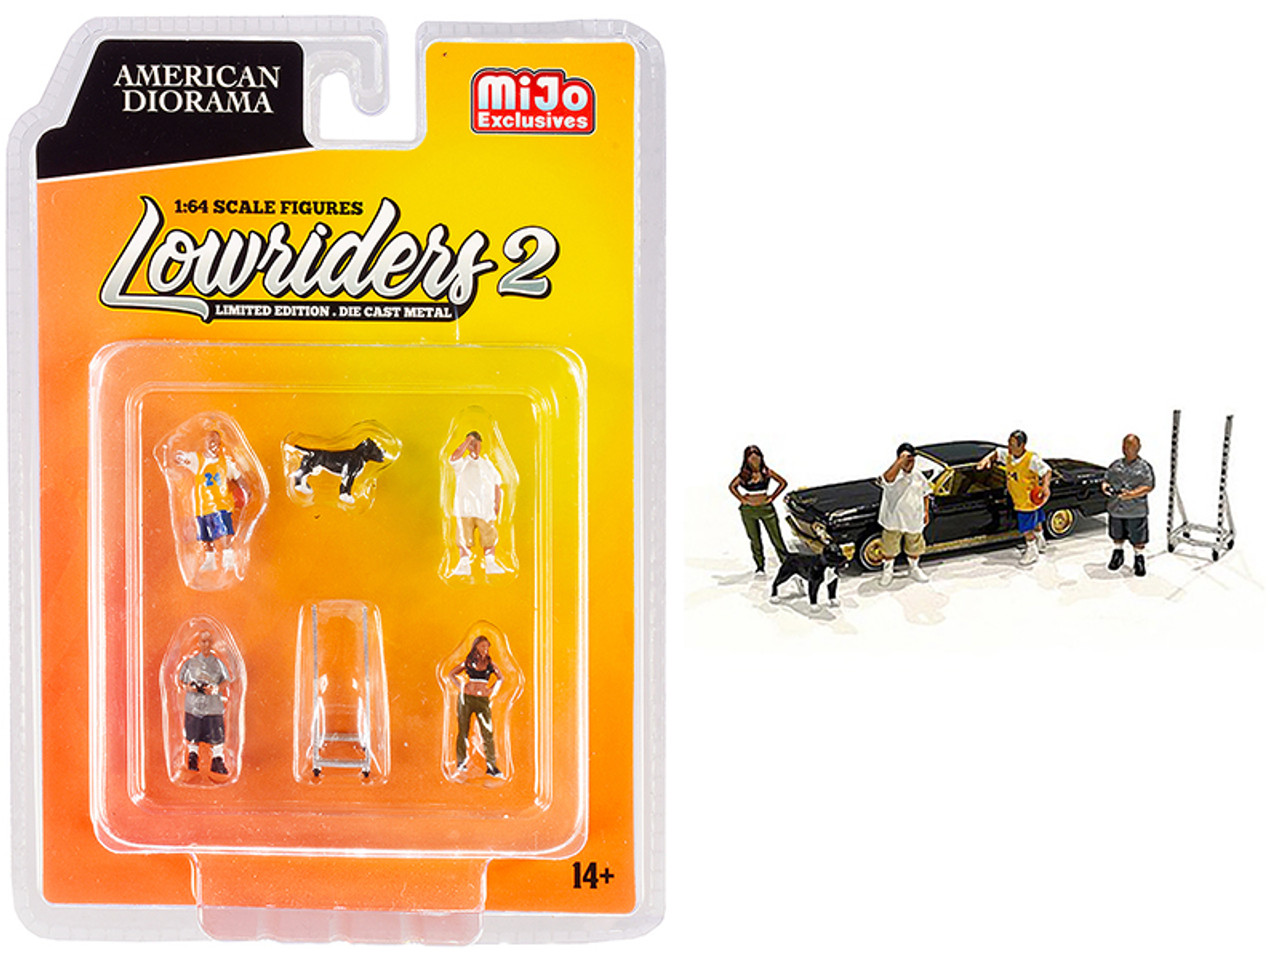 "Lowriders 2" 6 piece Diecast Set (4 Figurines and 1 Dog and 1 Accessory) for 1/64 Scale Models by American Diorama